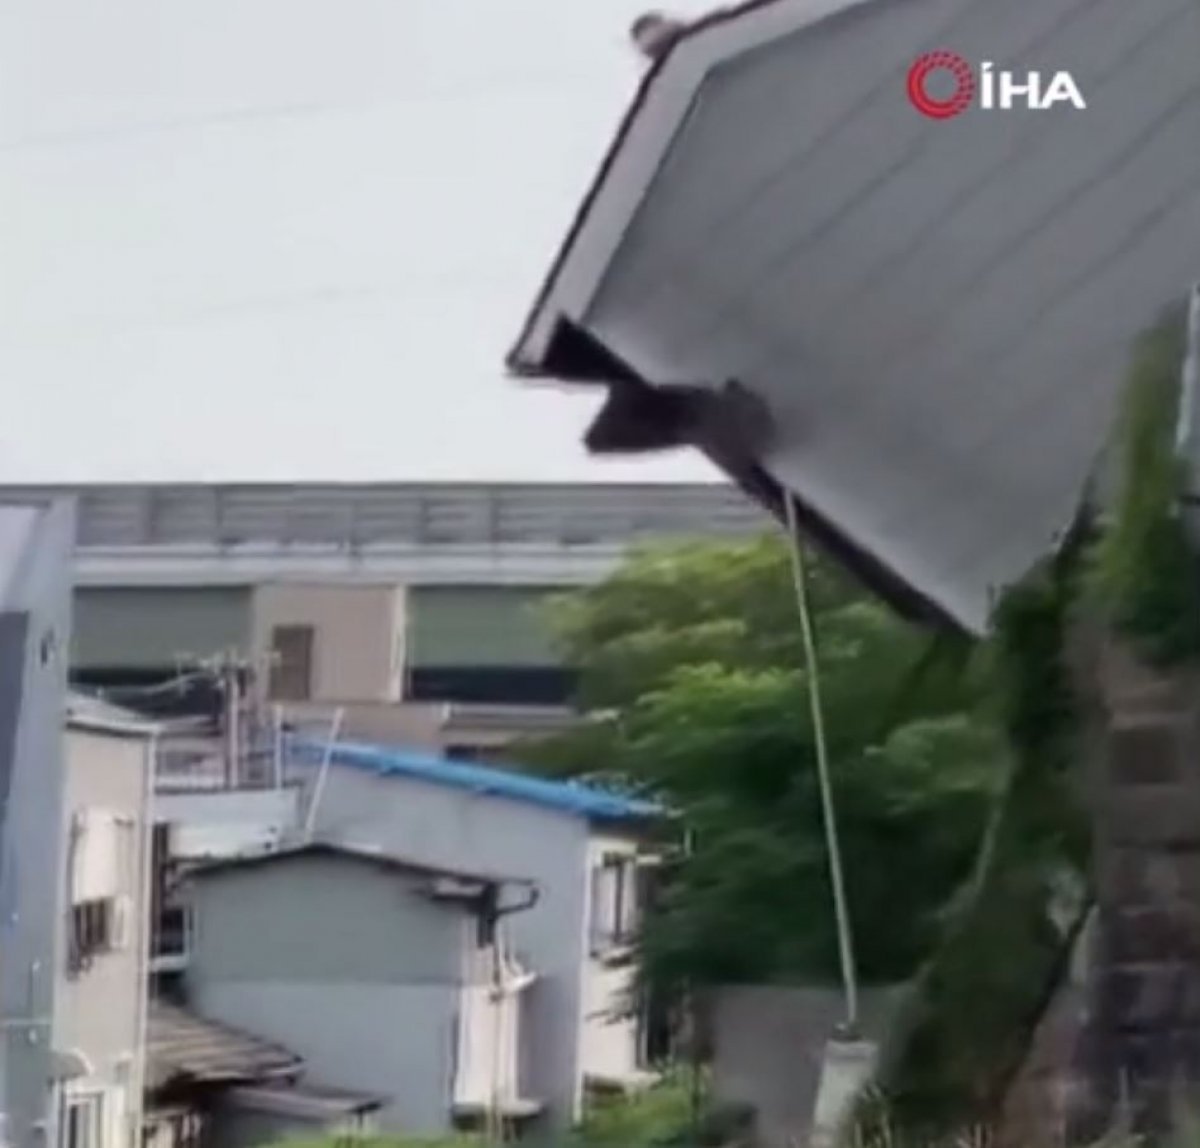 The moment of collapse of the building in Japan #1